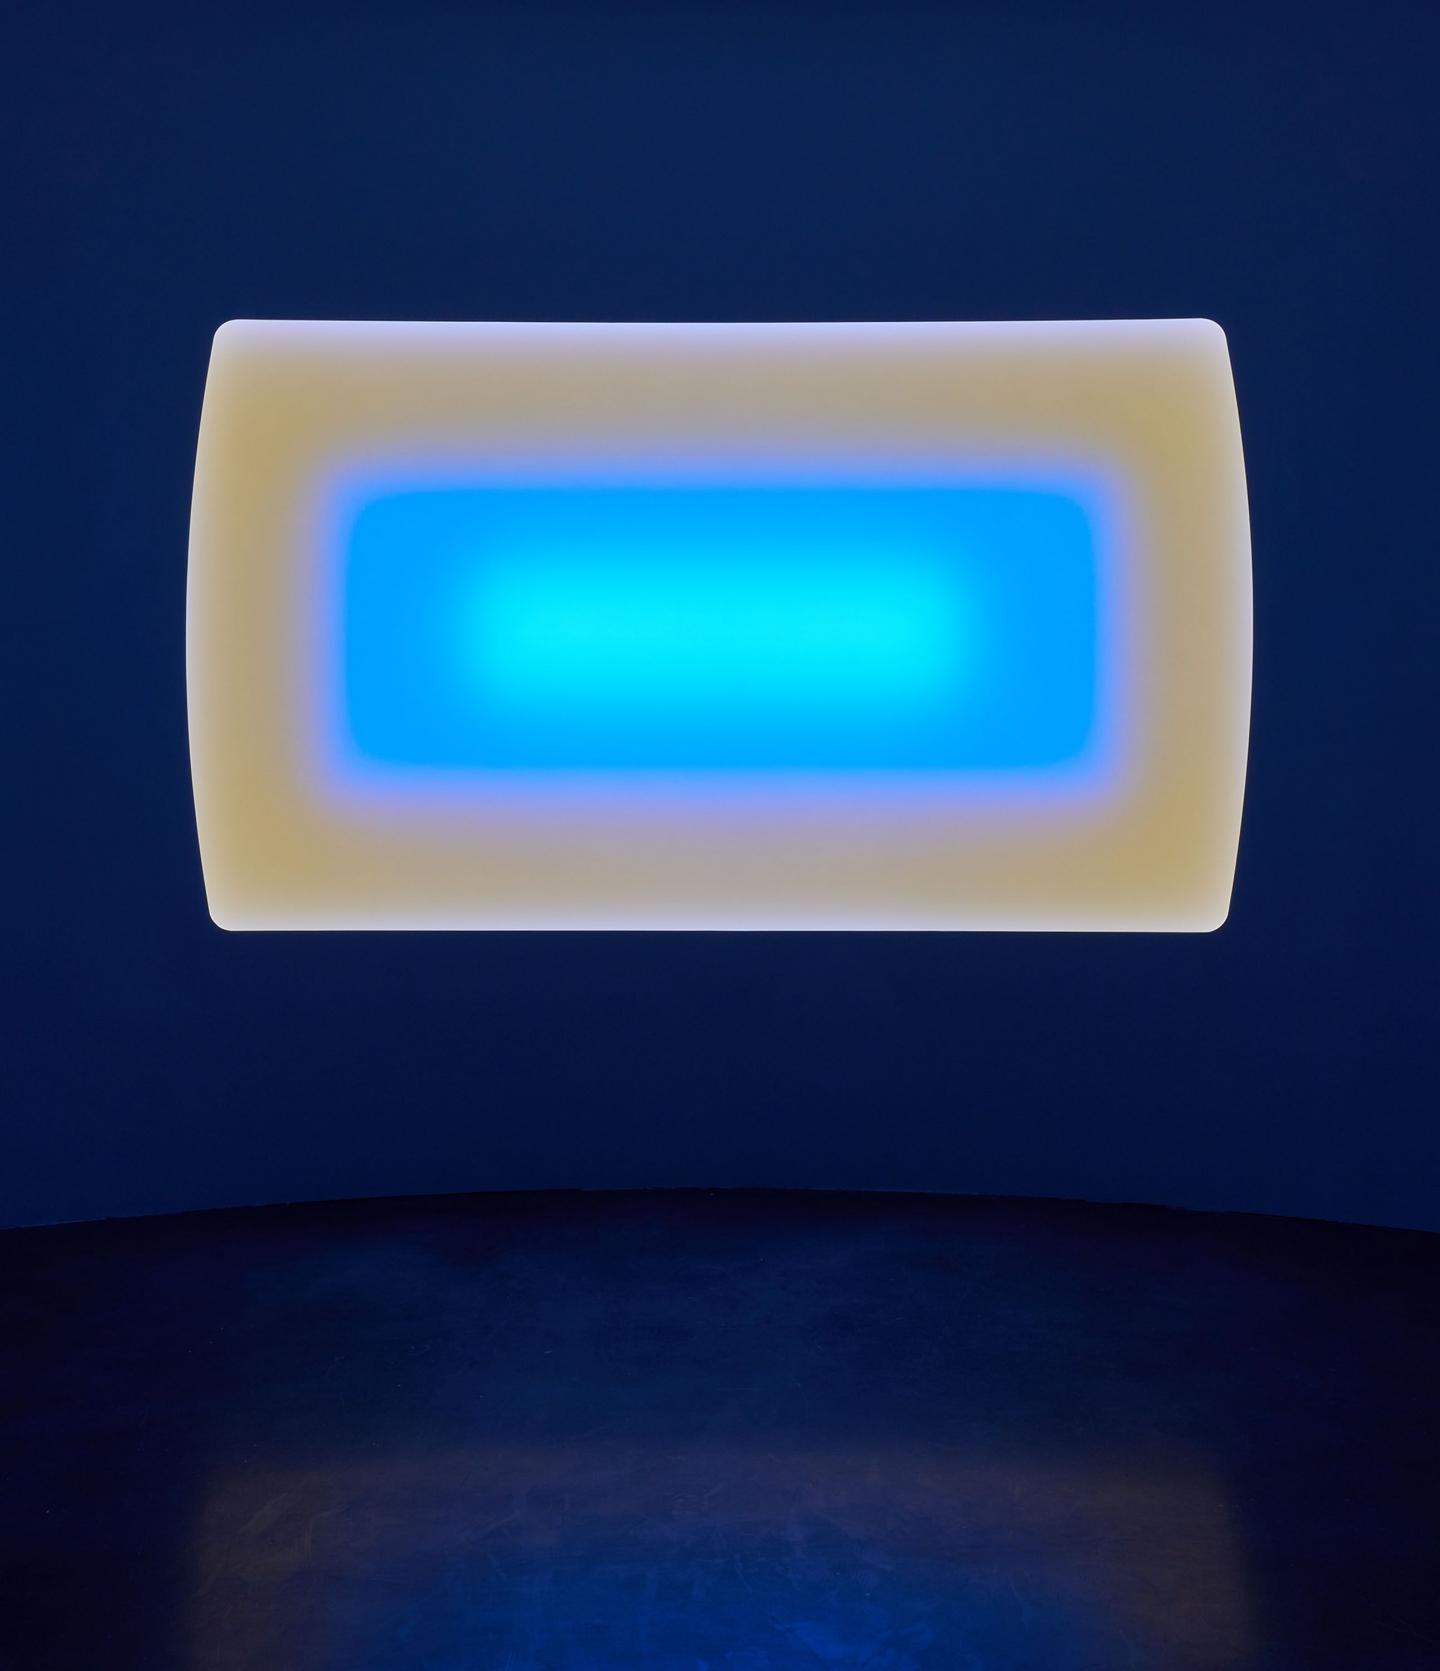 James Turrell, Elemental, Wide Rectangular Curved Glass, 2021, LED light, etched glass and shallow space, 182.9 × 304.8 cm, Runtime: 2 hours 30 minutes © James Turrell